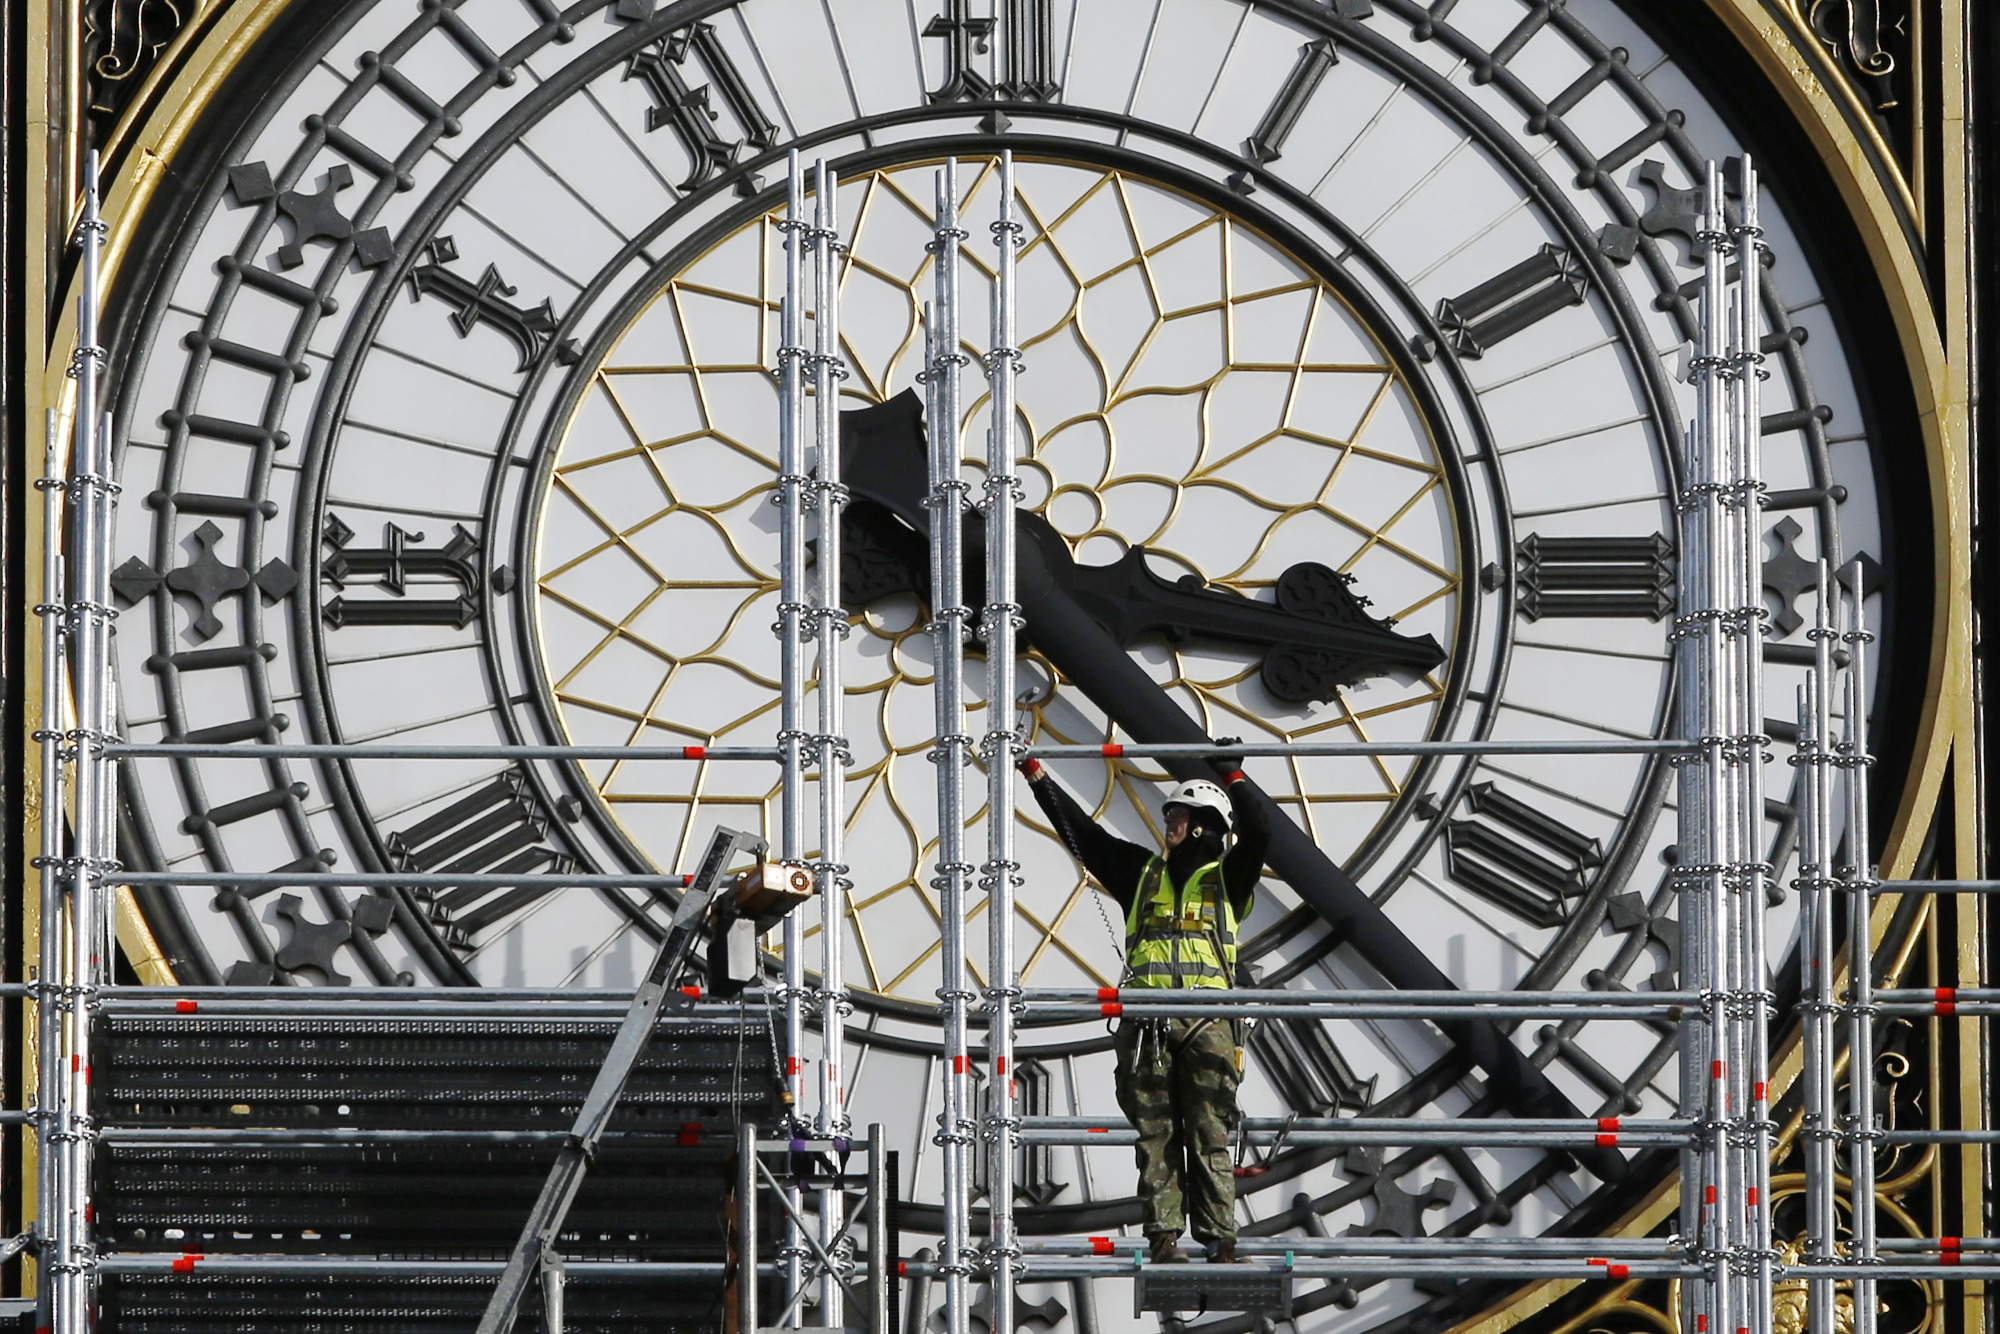 A construction worker adjusts scaffolding outside the clock face on Elizabeth Tower, also known as 'Big Ben', in London, U.K., on Wednesday, Oct. 11, 2017. U.K. Prime Minister Theresa May and her most senior cabinet ministers risk igniting the anger of their Tory colleagues with a series of comments that raise questions over their commitment to Brexit.